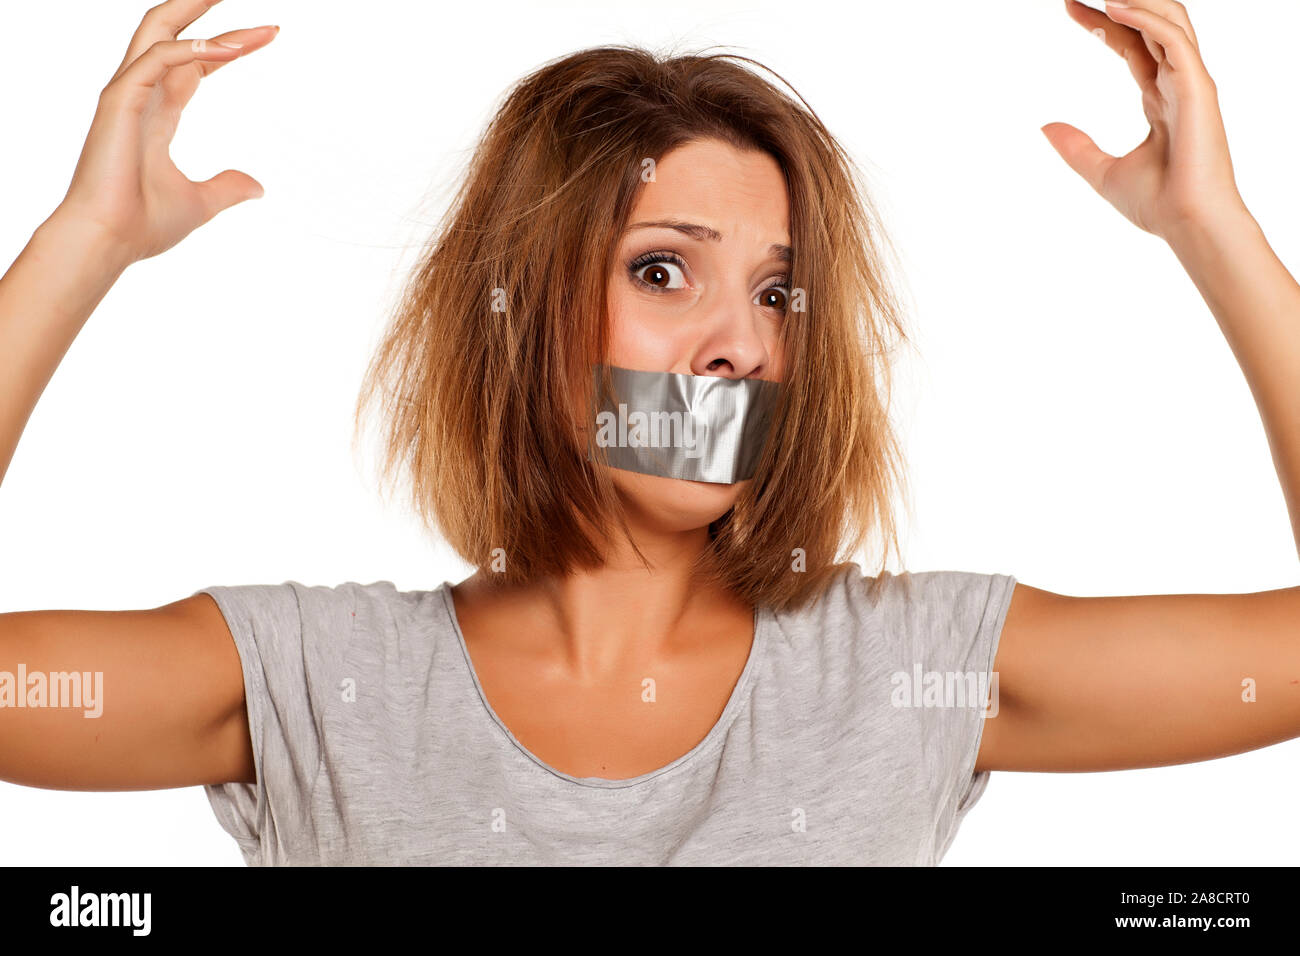 nervous young woman with adhesive tape over her mouth Stock Photo